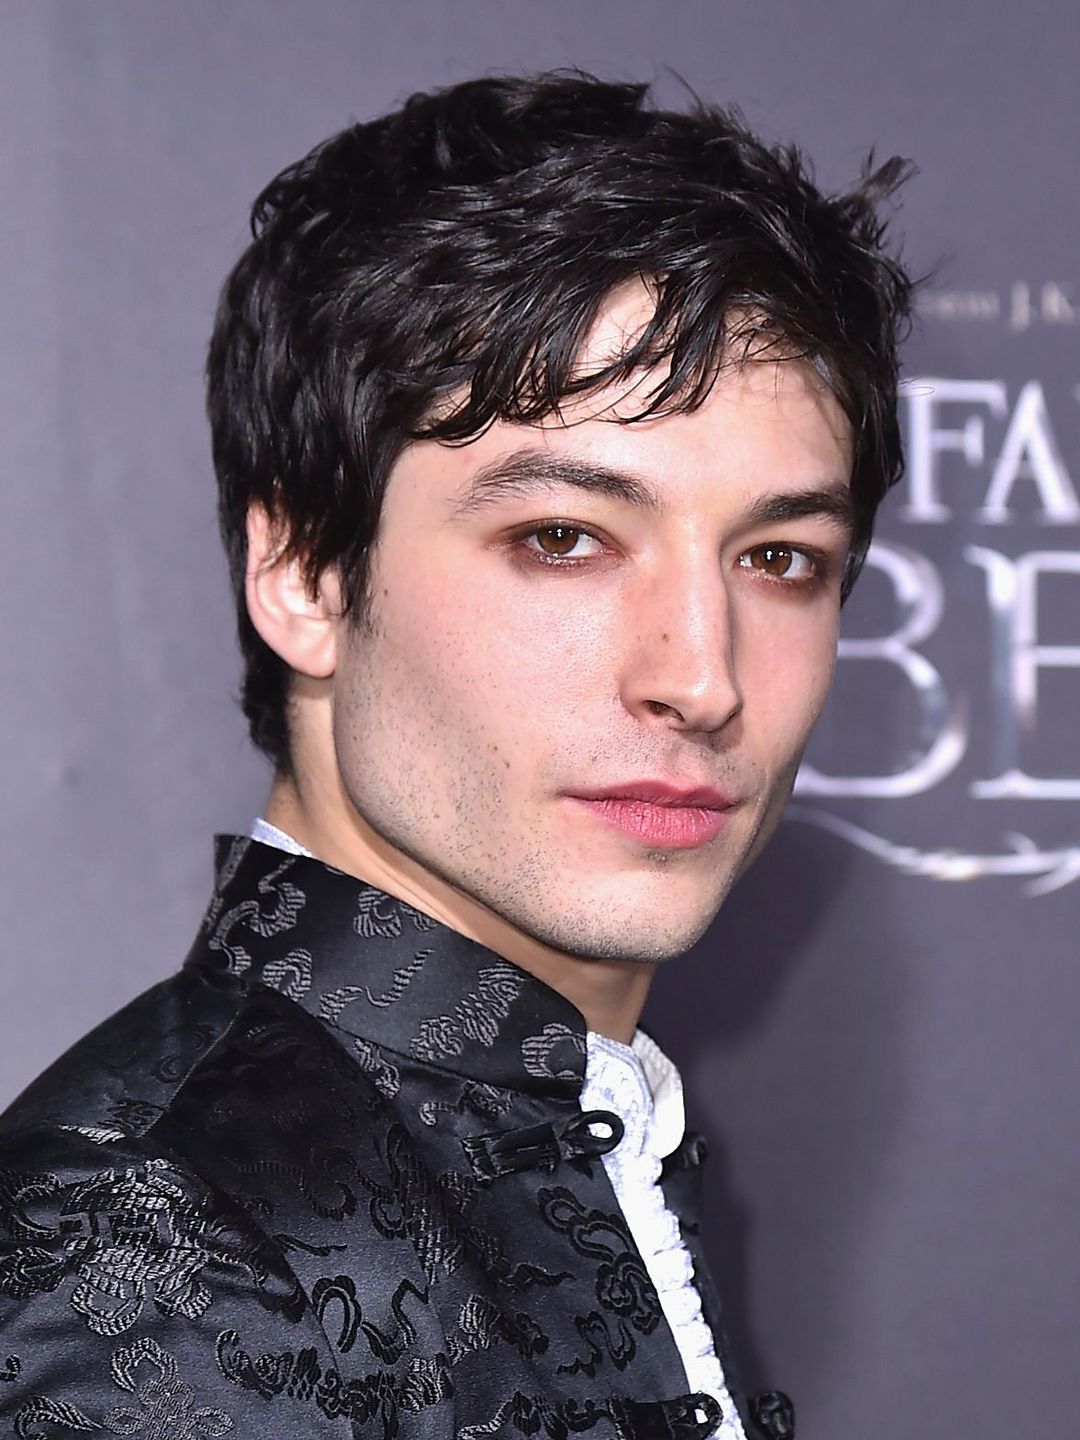 Ezra Miller who are his parents